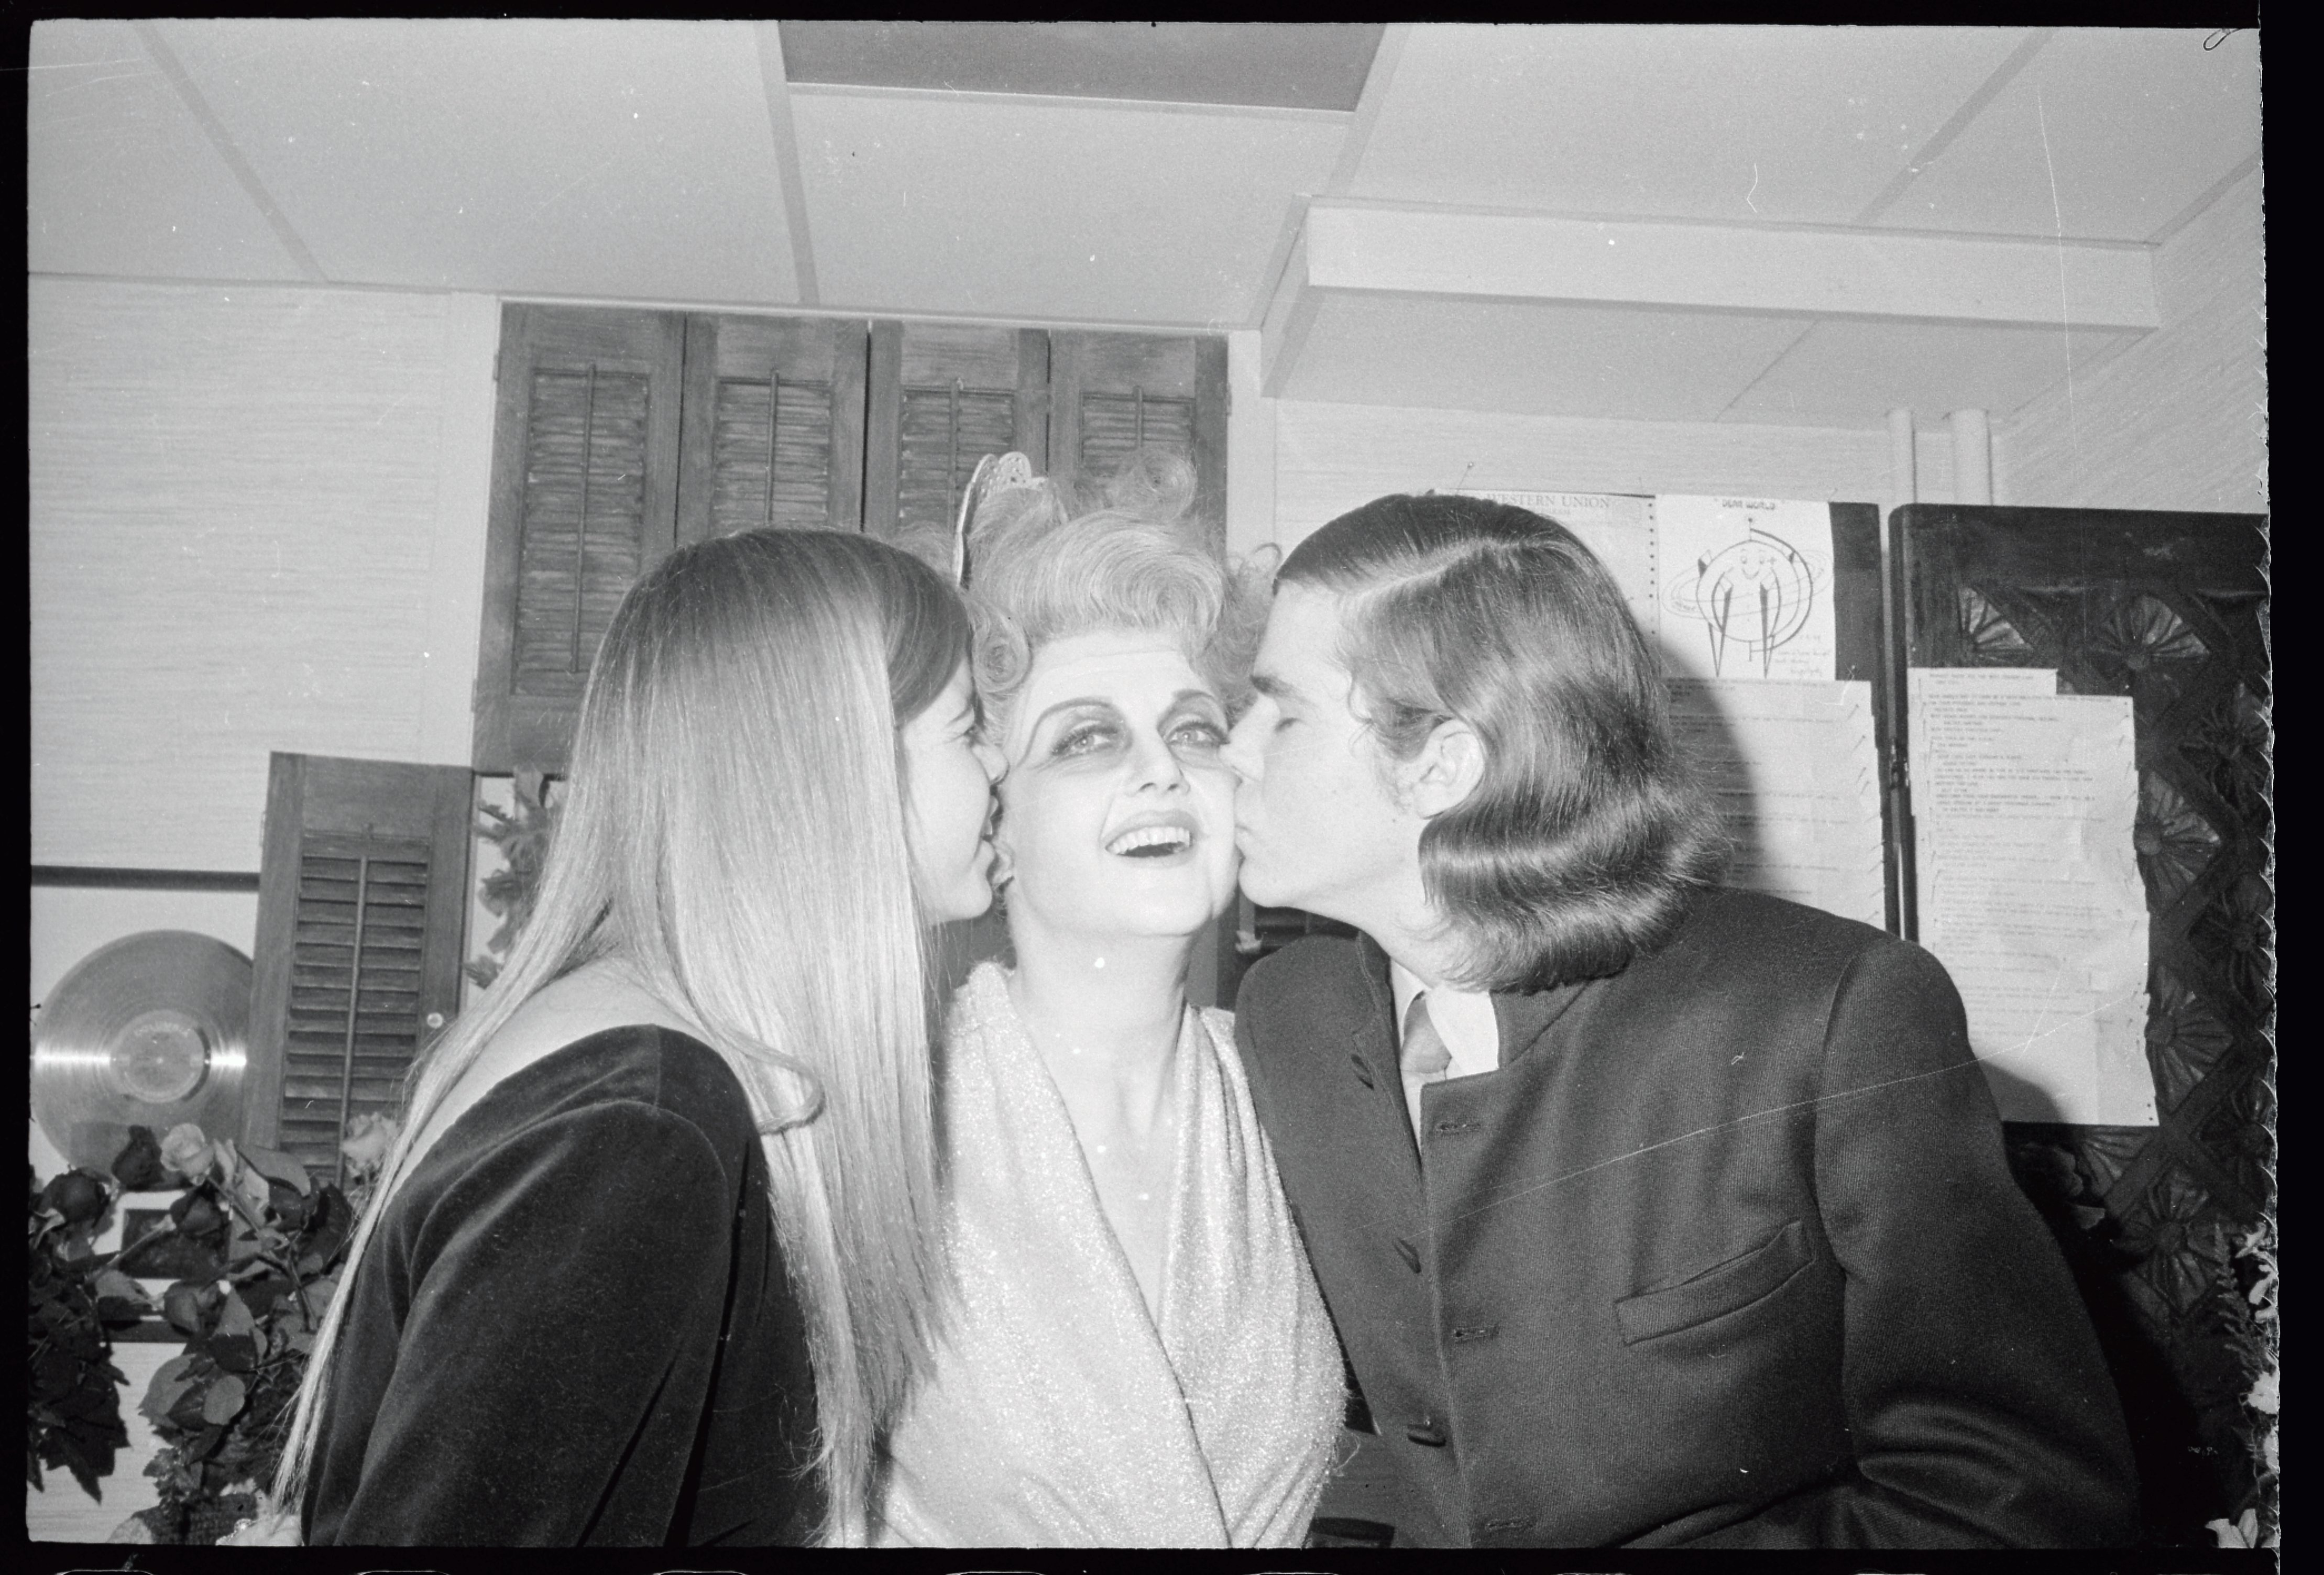 Angela Lansbury is kissed by her children, Deidre, 16, and Anthony, 17, following her opening night performance in the musical "Dear World" at the Mark Hellinger in January on January 16, 1969. | Source: Getty Images